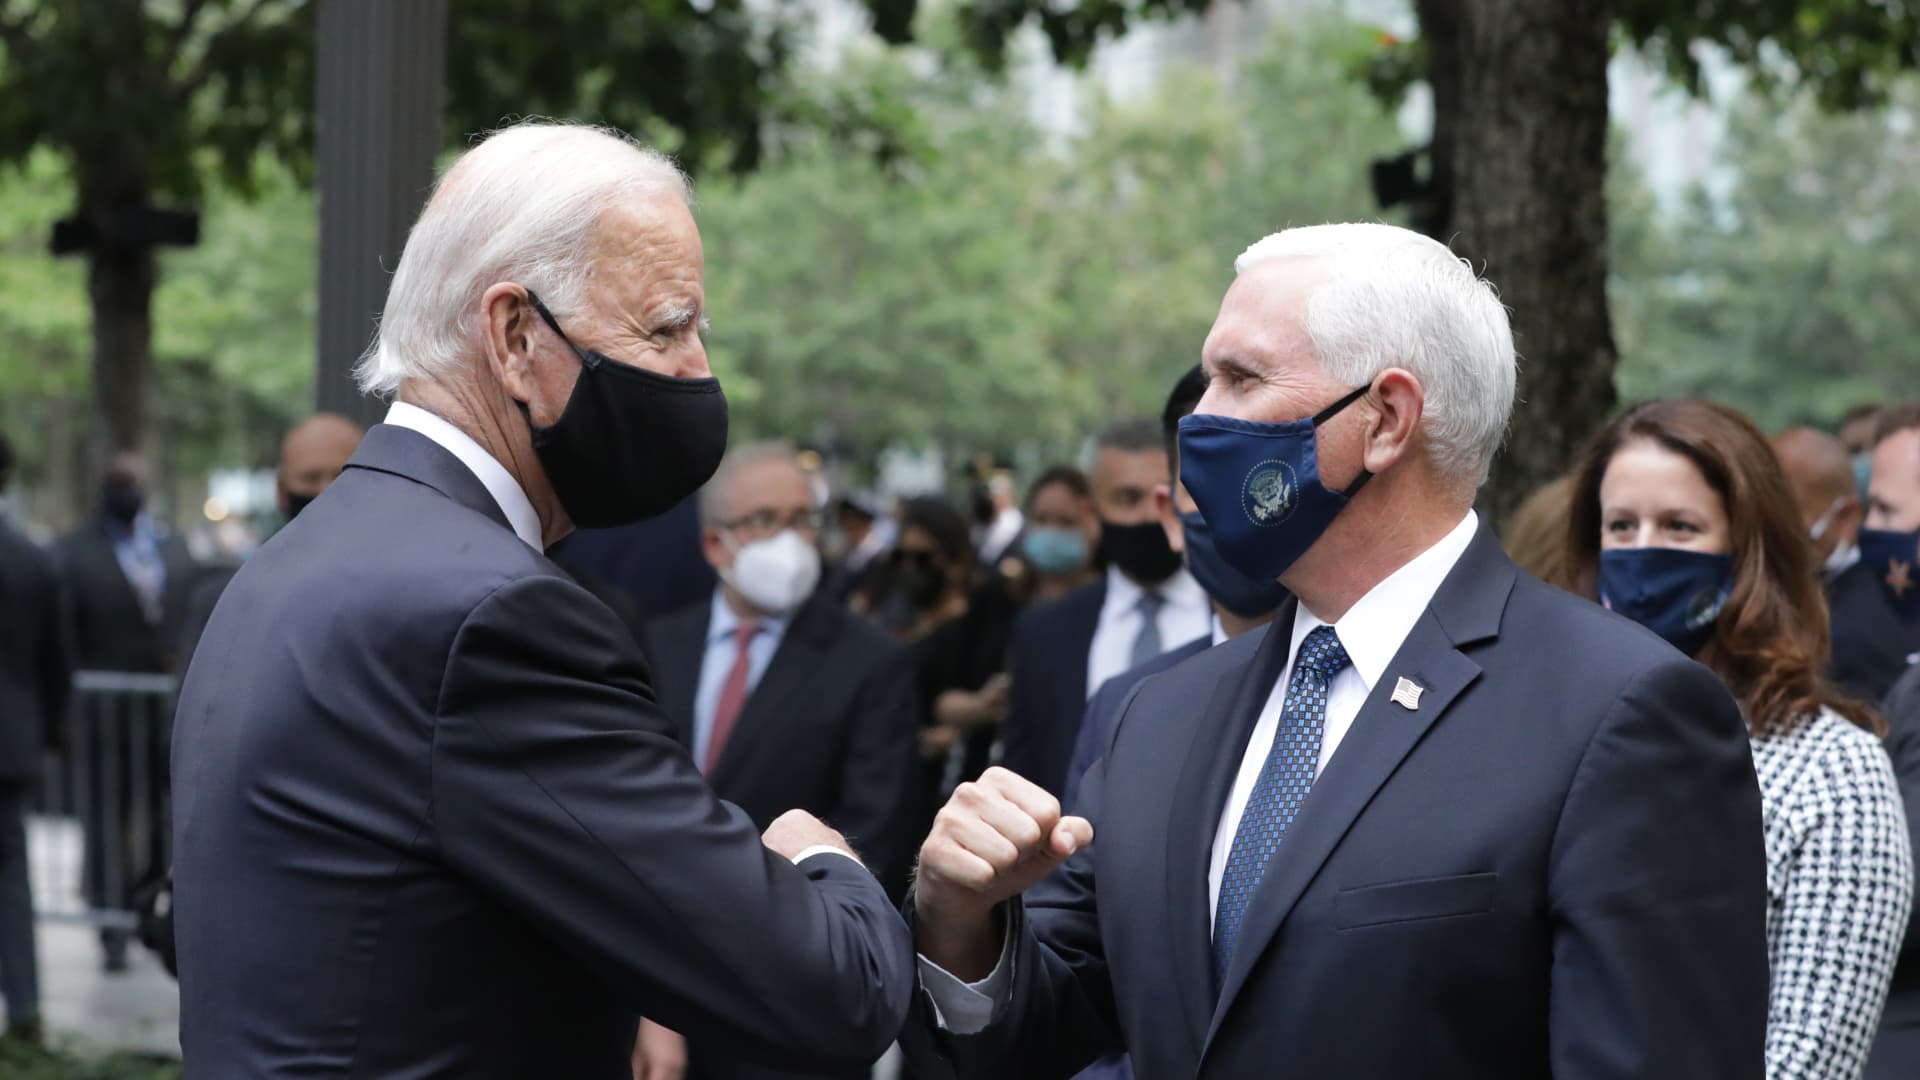 Democratic presidential nominee Joe Biden (L) and U.S. Vice President Mike Pence (R) greet each other during a 9/11 memorial service at the National September 11 Memorial and Museum on September 11, 2020 in New York City.